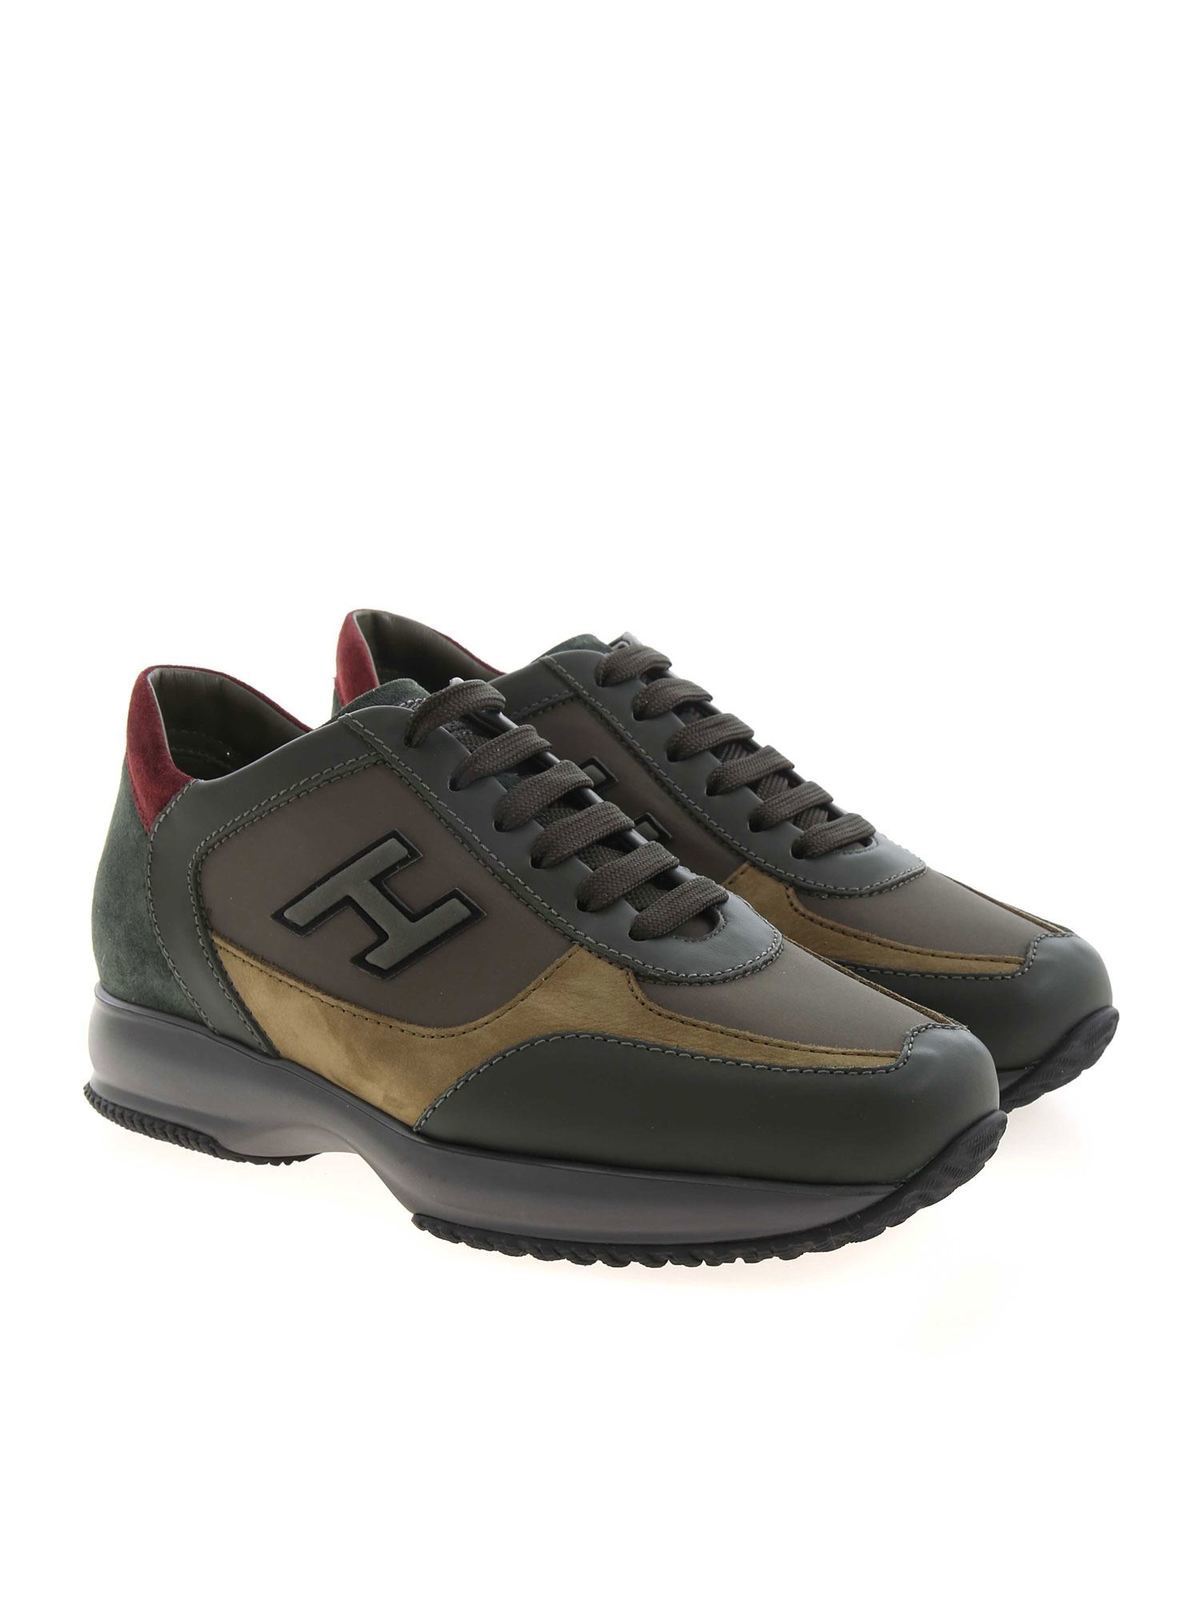 Trainers Hogan - Interactive sneakers in shades of green ...